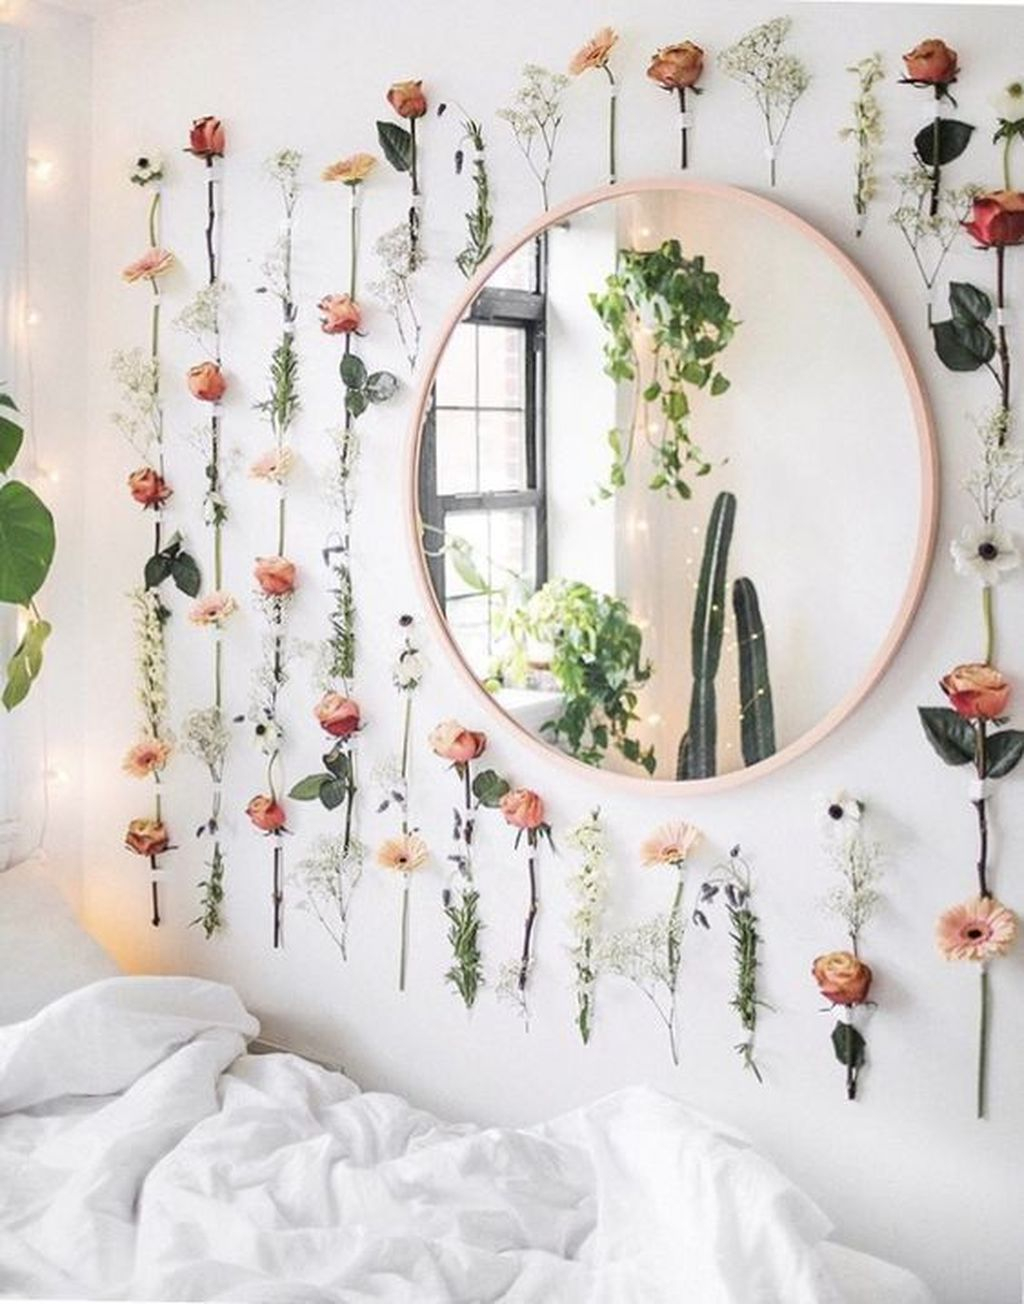 Admiring Bedroom Decor Ideas To Have Right Now 16